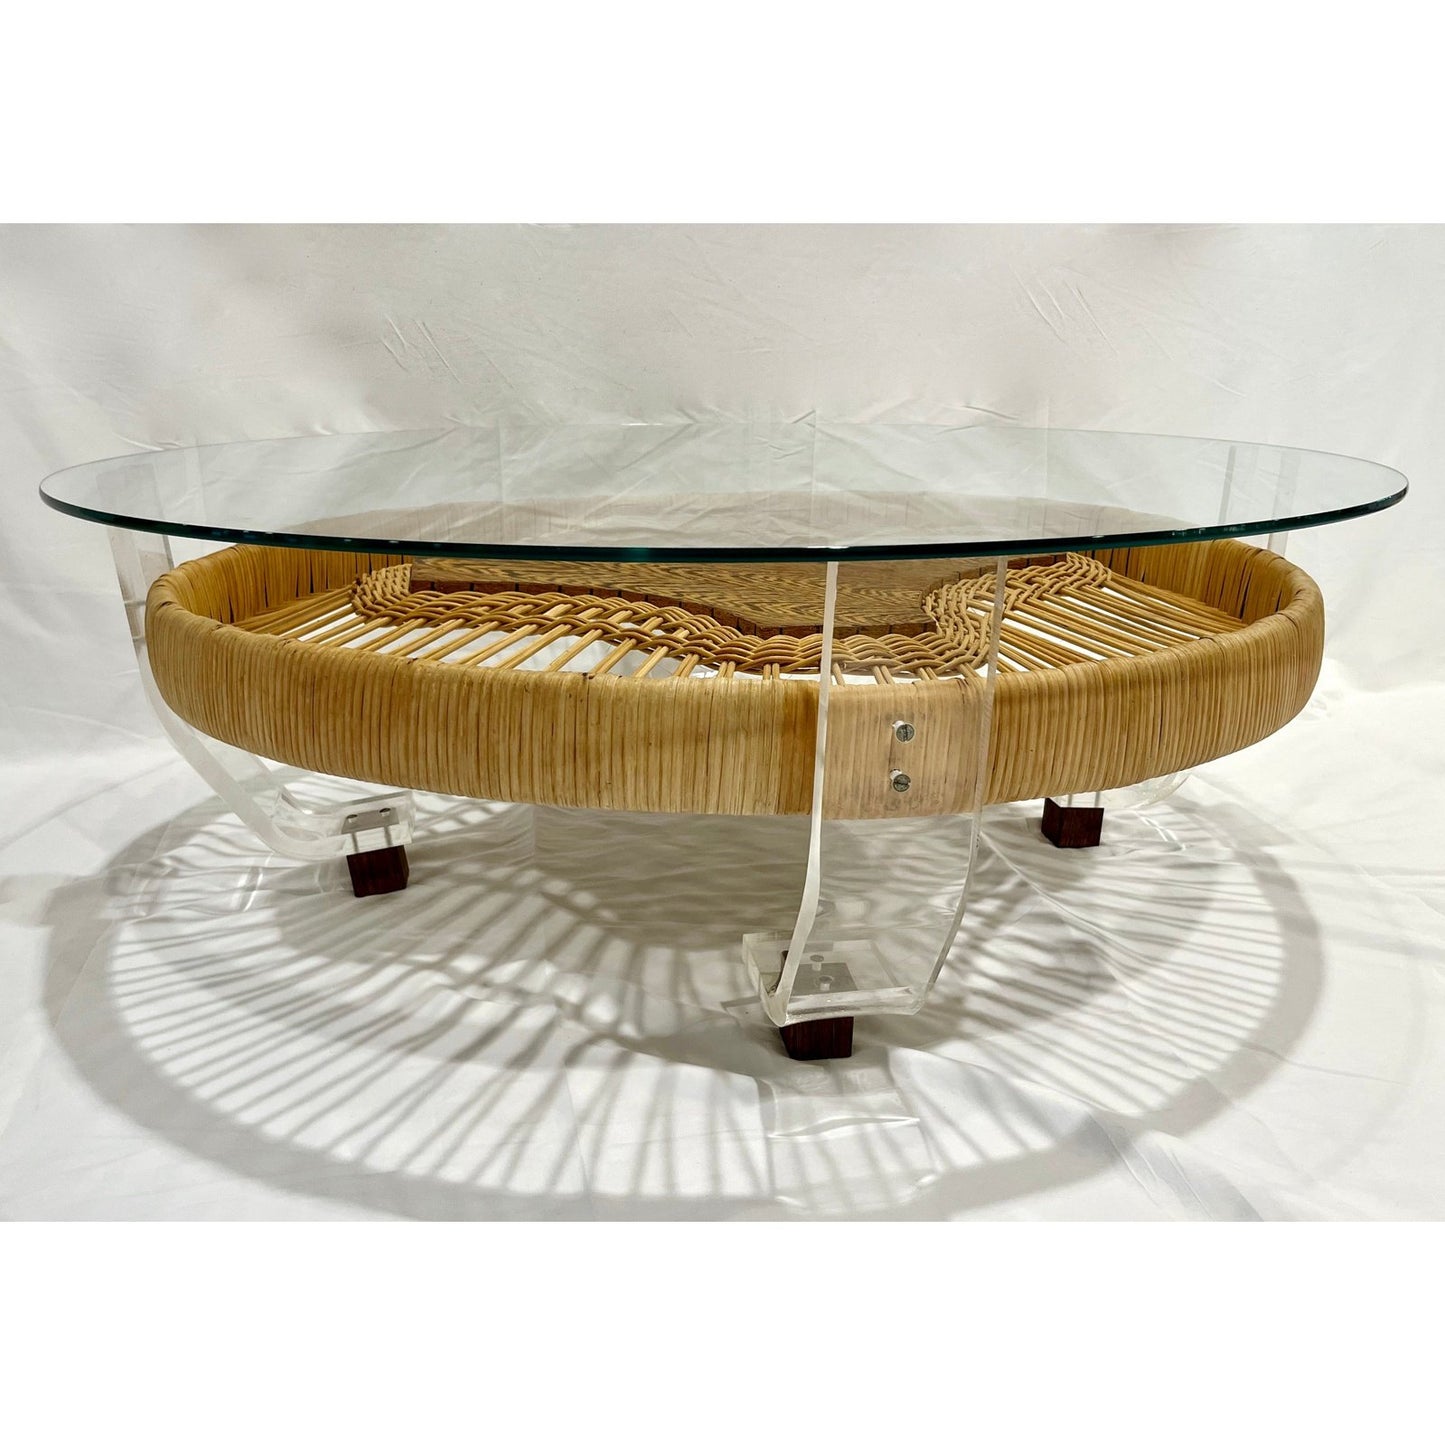 French Vintage 2-Tier Jacaranda Wood Weaved Rattan Sofa Table with Lucite Feet